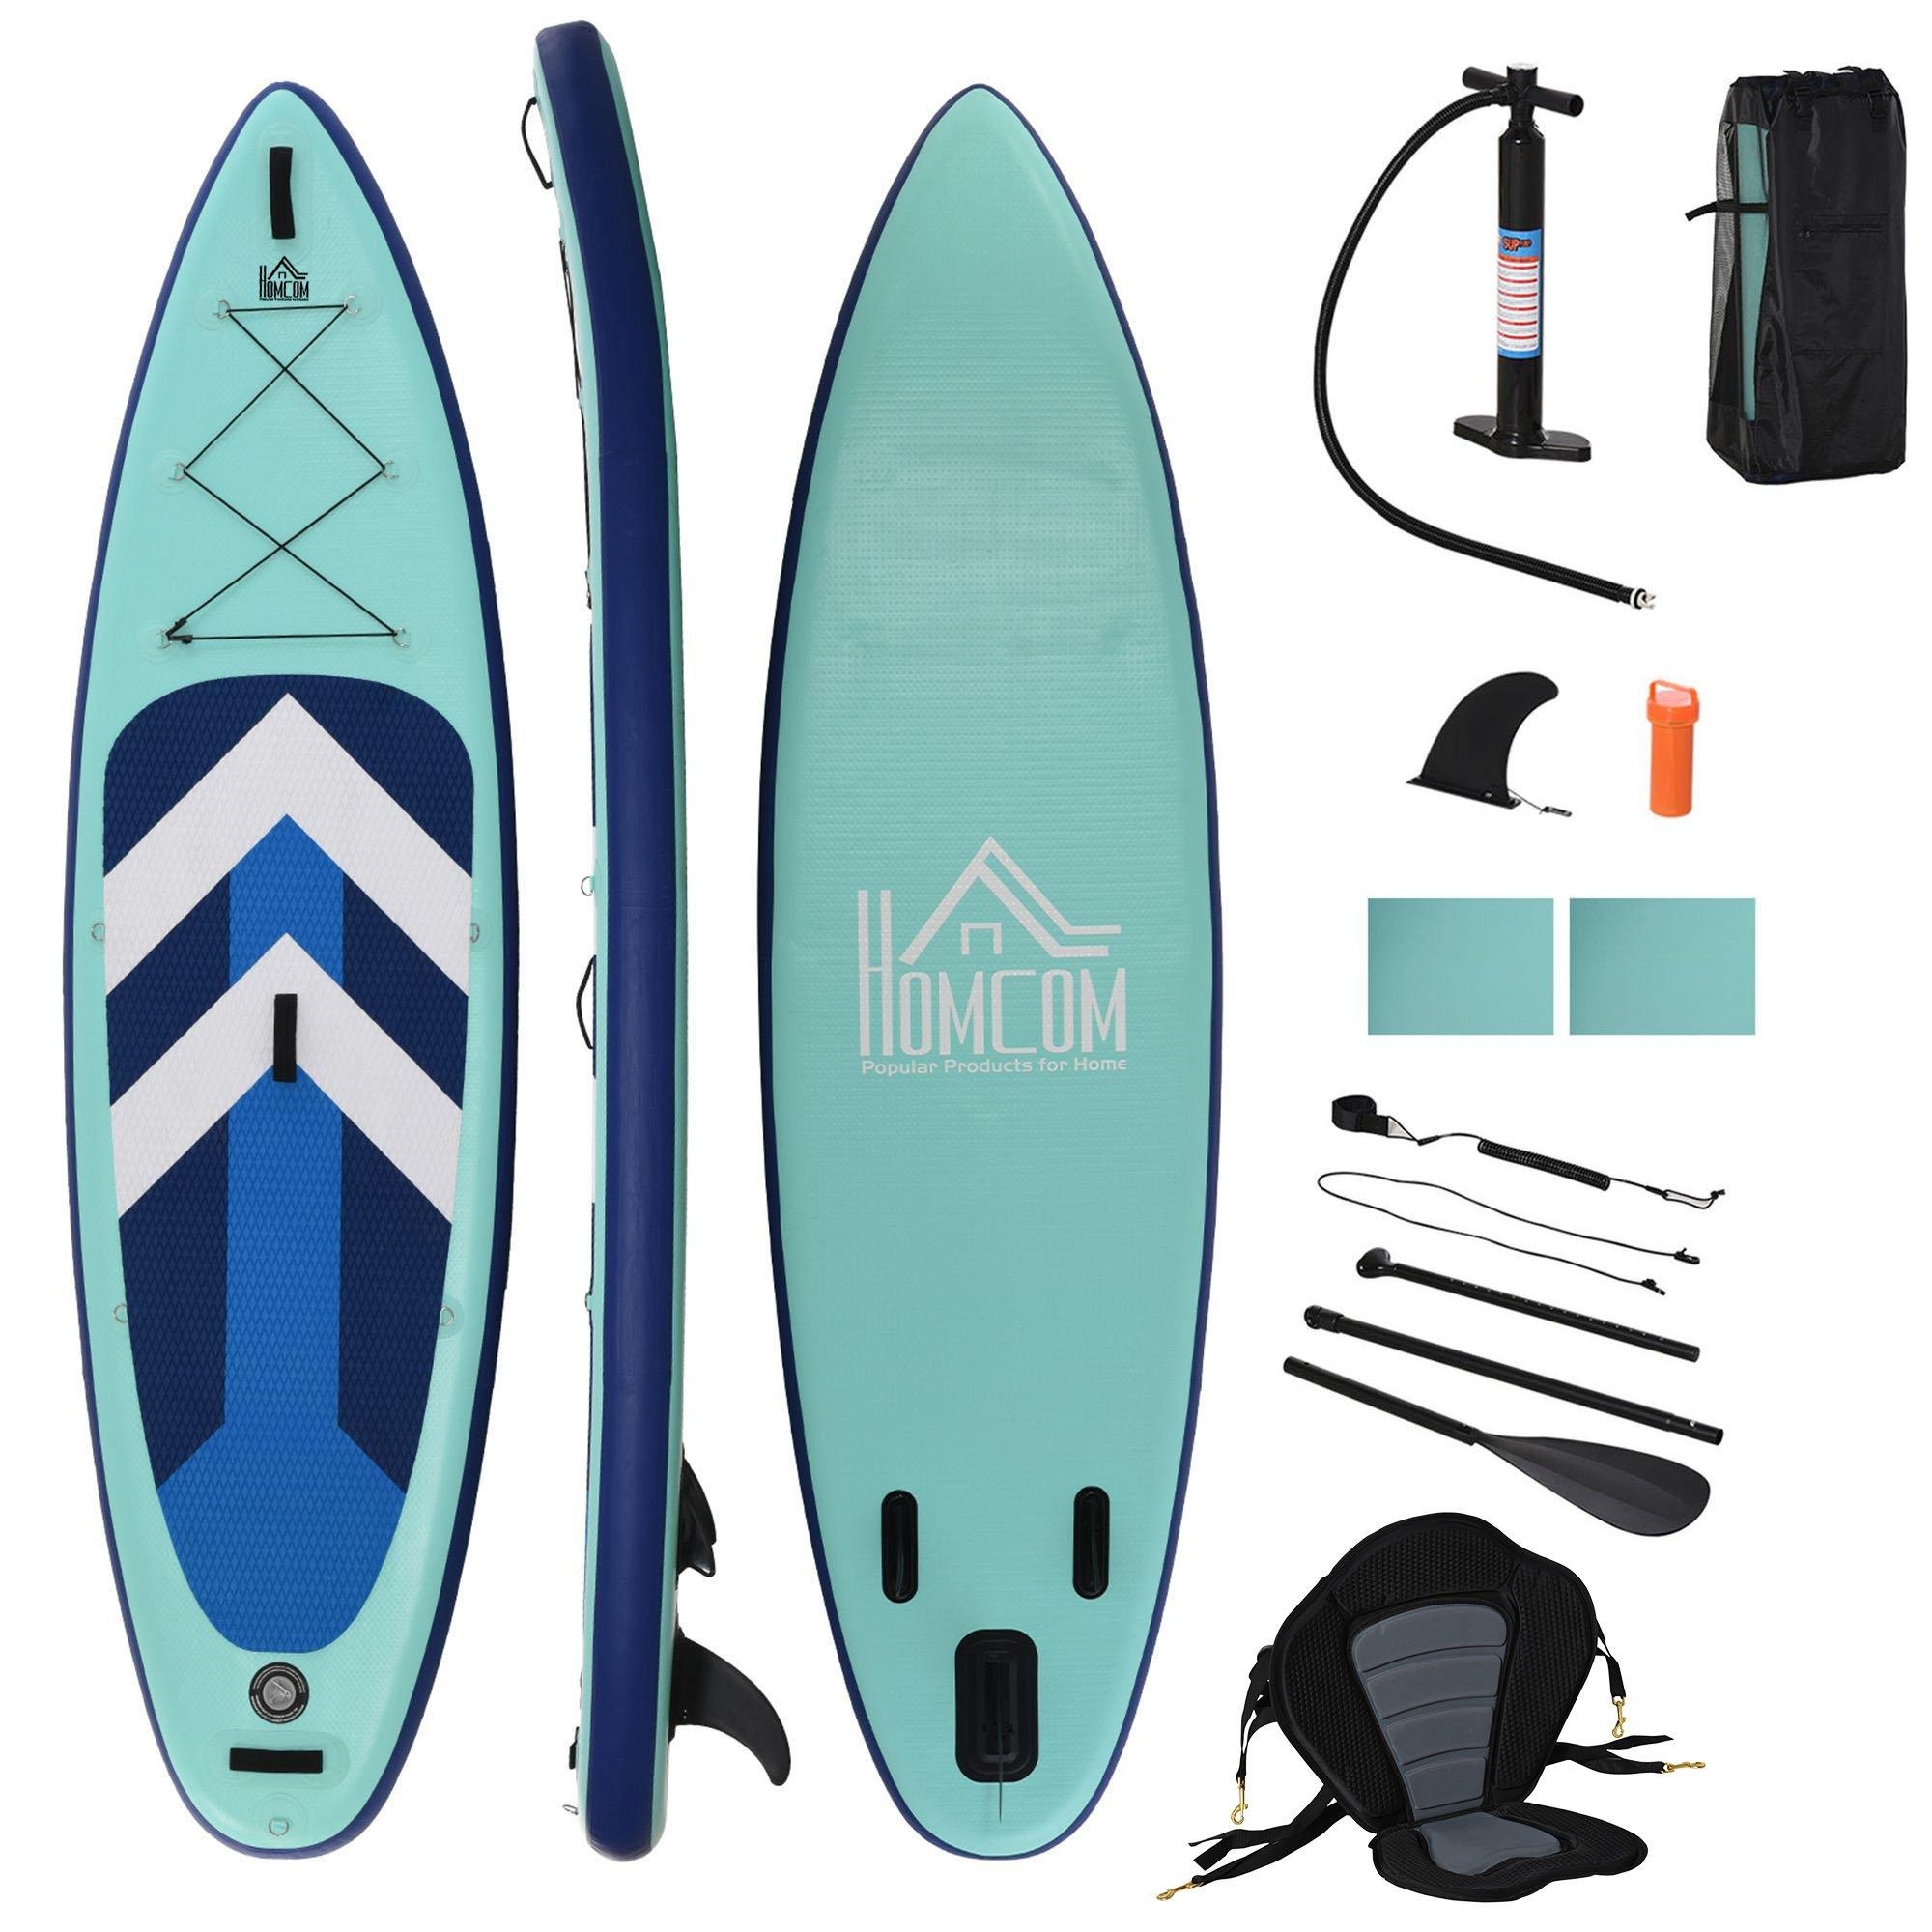 10.5ft Inflatable Stand Up Paddle Board Kayak Conversion Kit SUP with Bag Seat